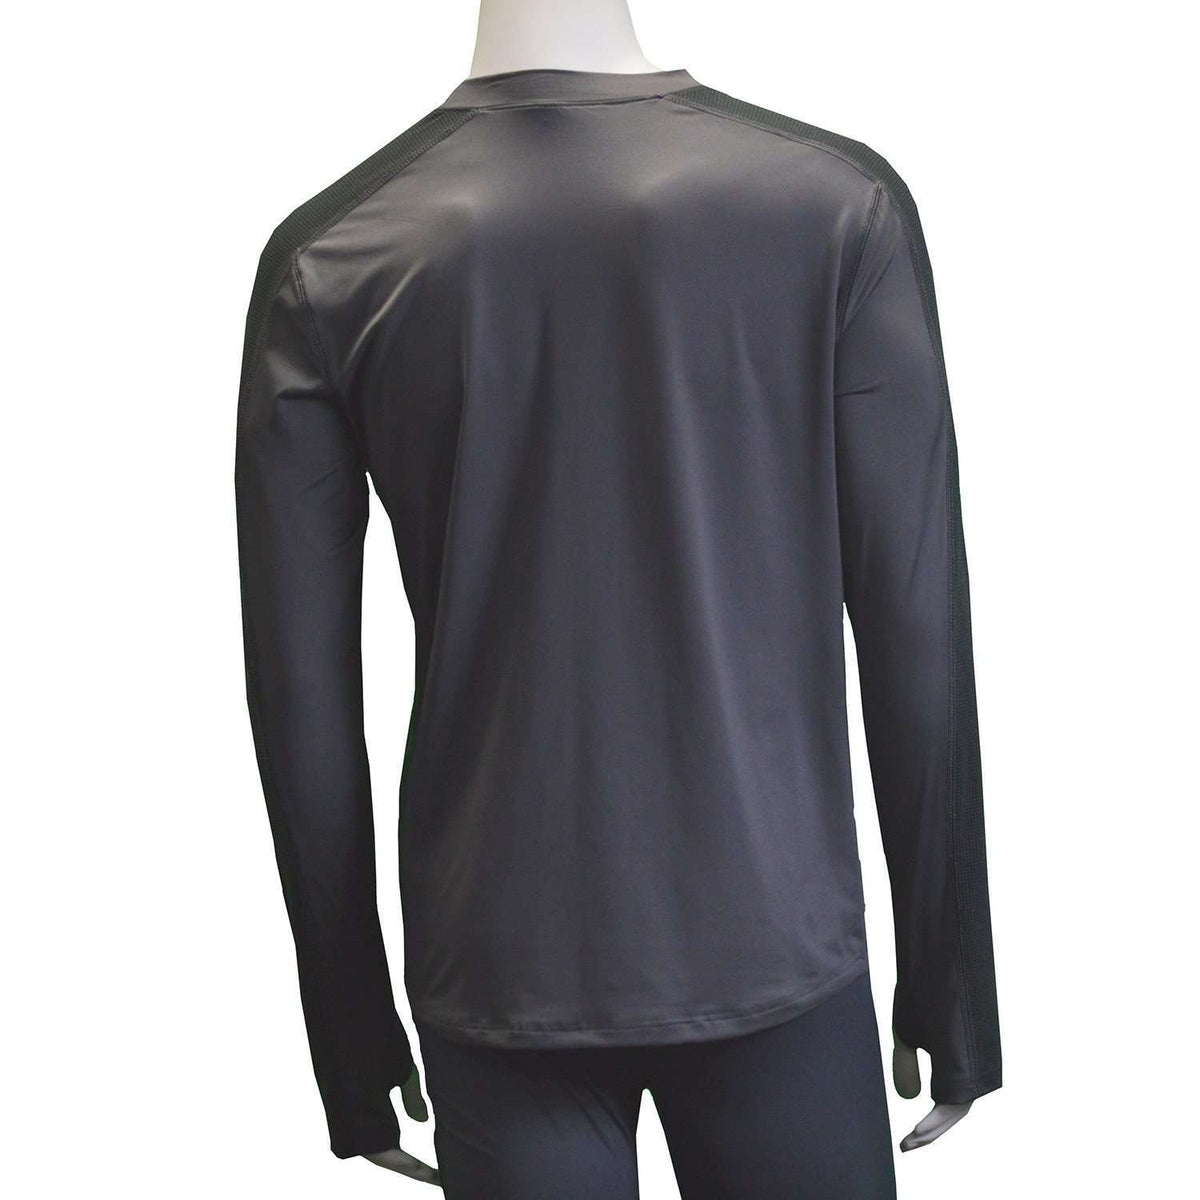 Long Sleeve Reflective Men's Warm Up Tee in Graphite/Black